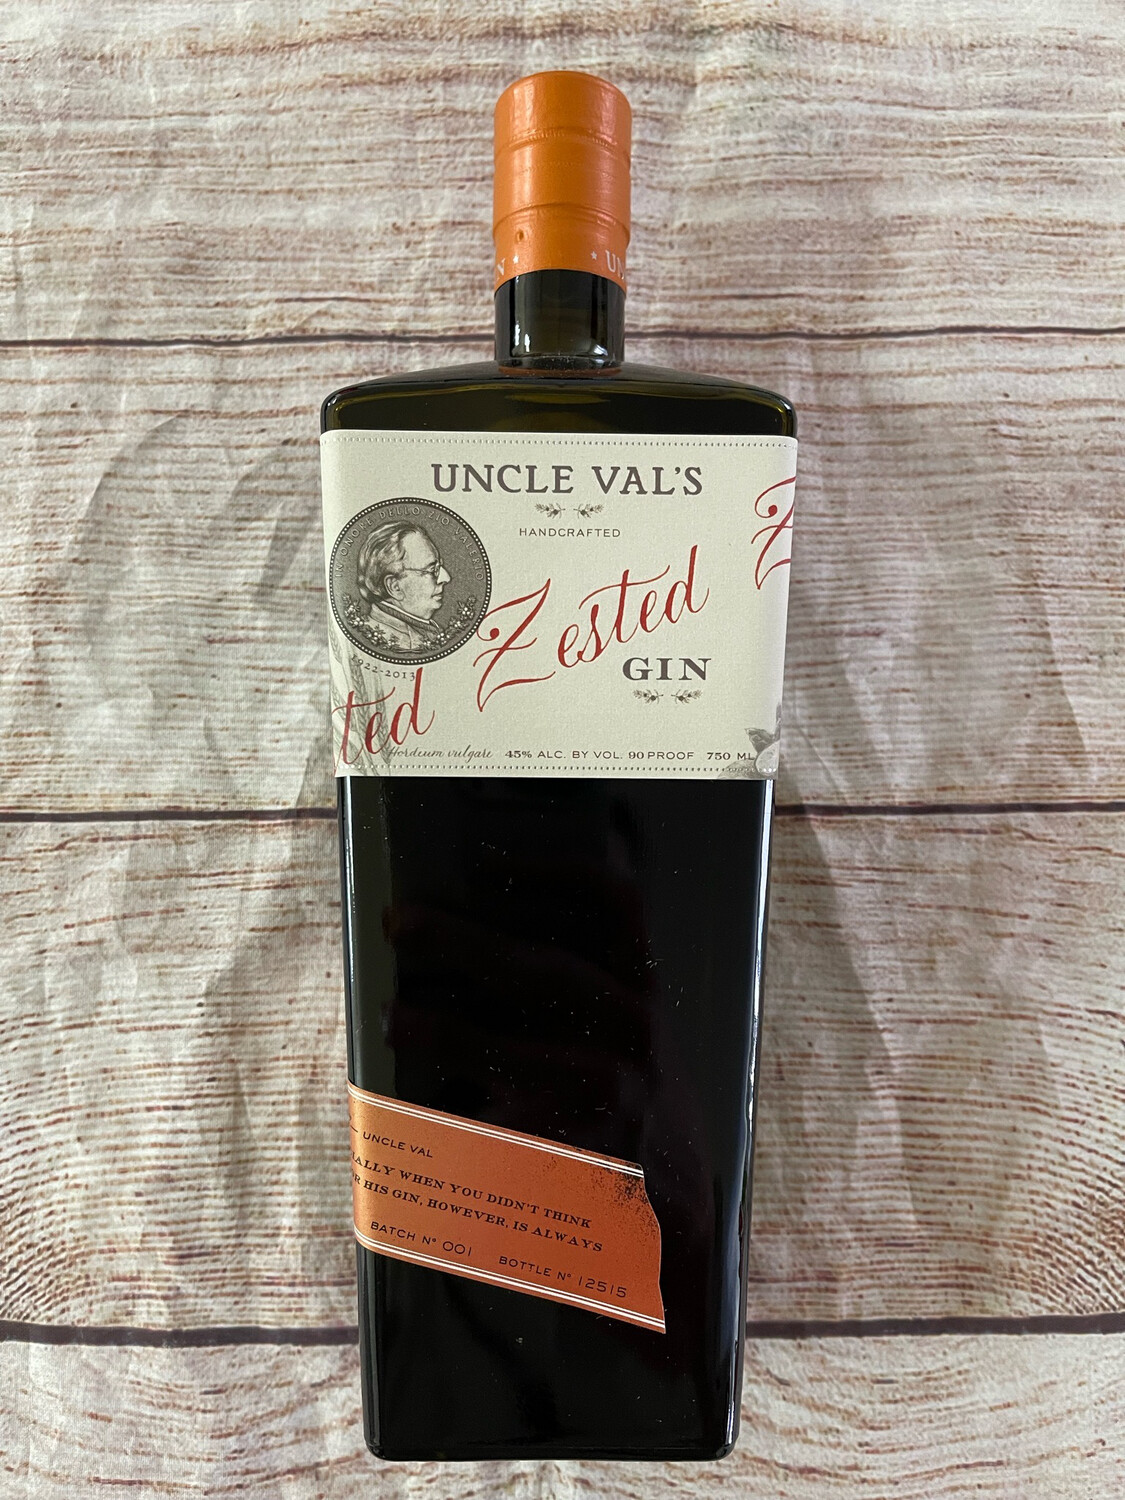 Uncle Val’s Zested Gin 750ml